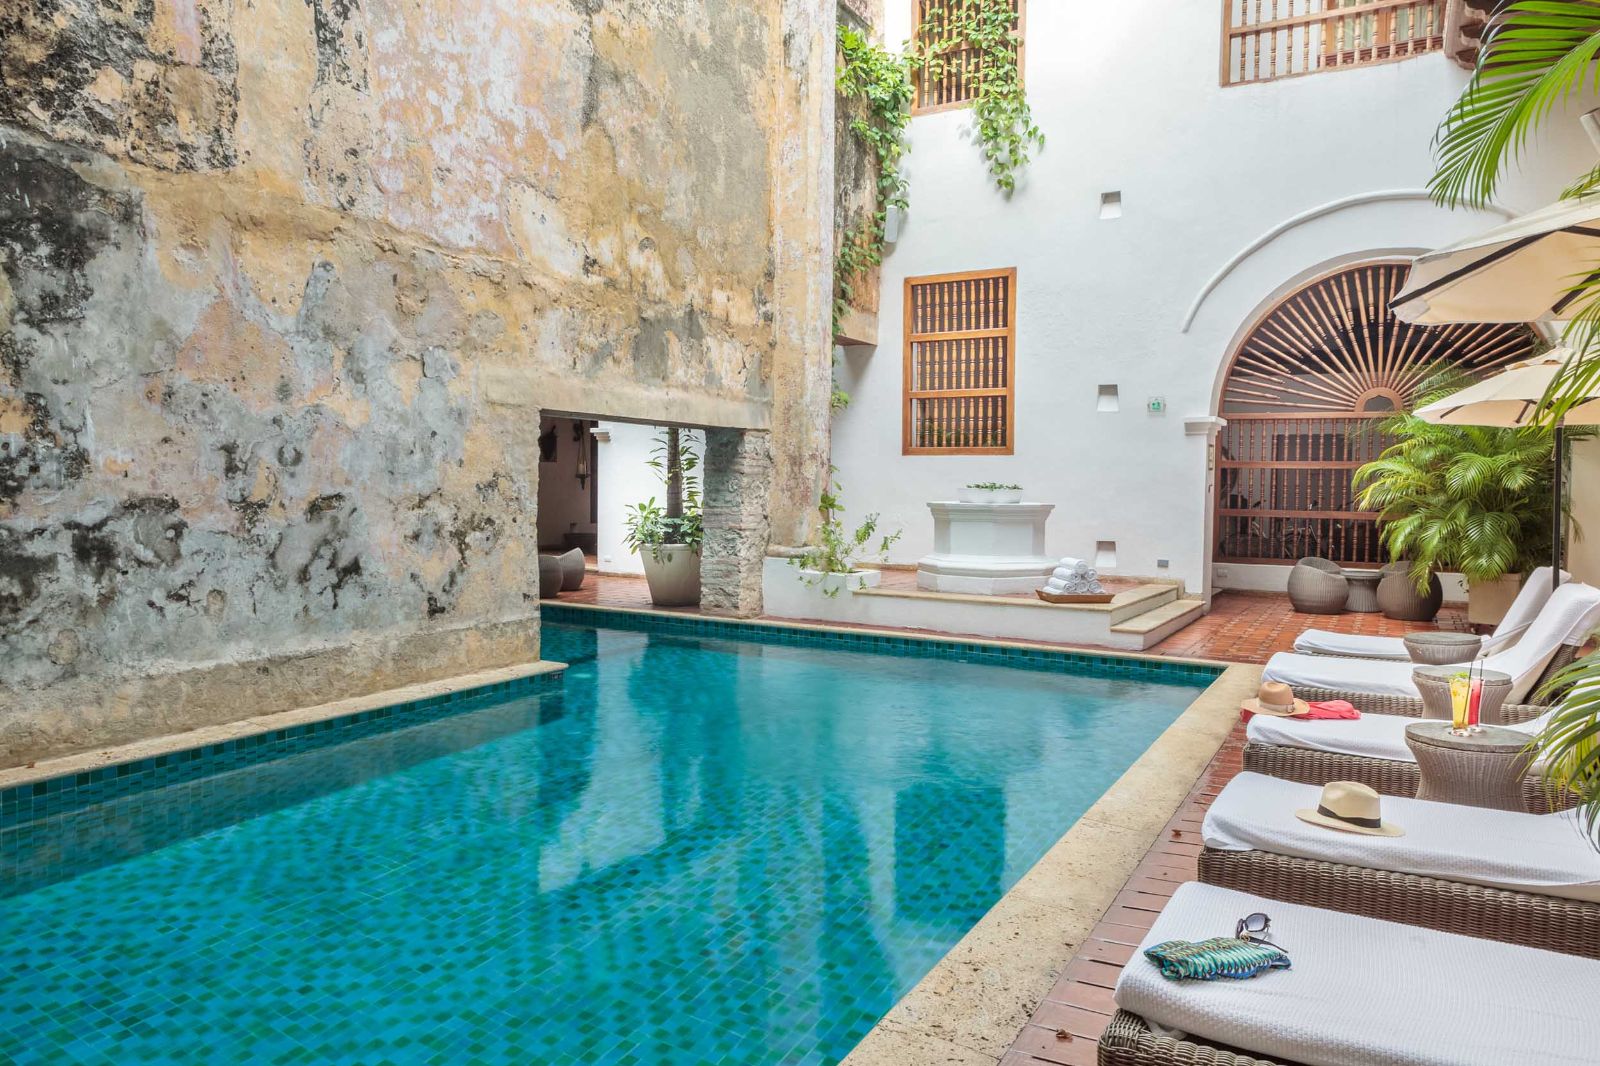 Poolside and loungers at Casa San Agustin in Cartagena, Colombia